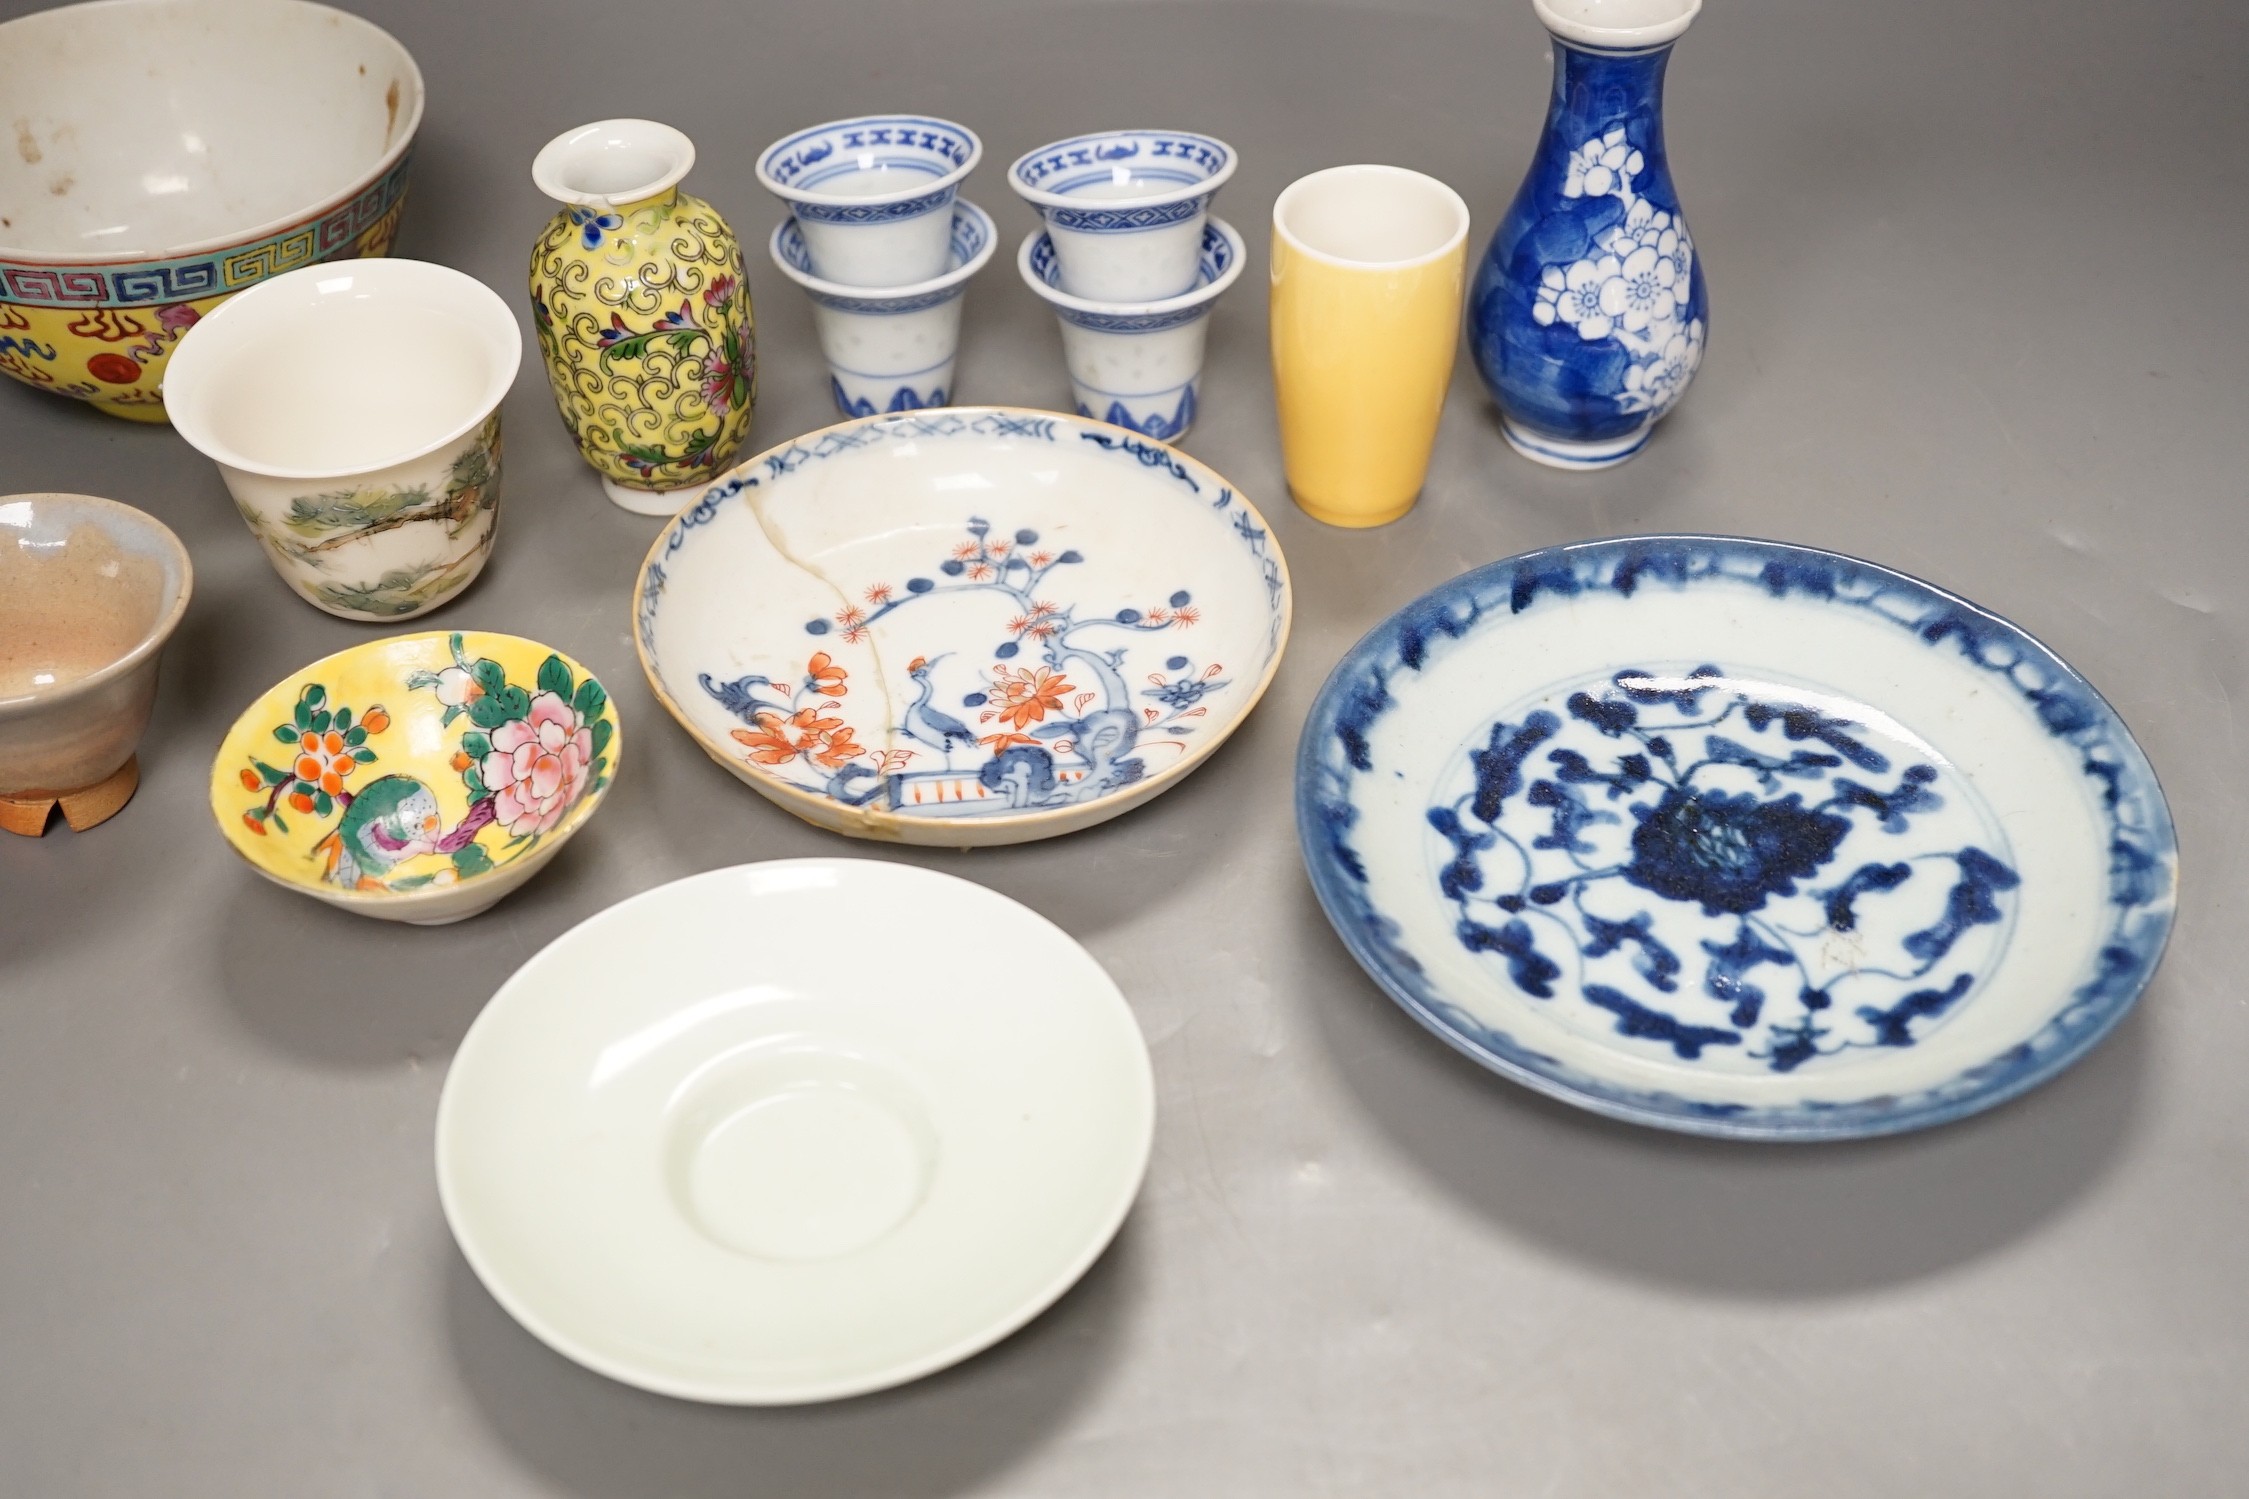 Assorted Chinese ceramics and a wooden box